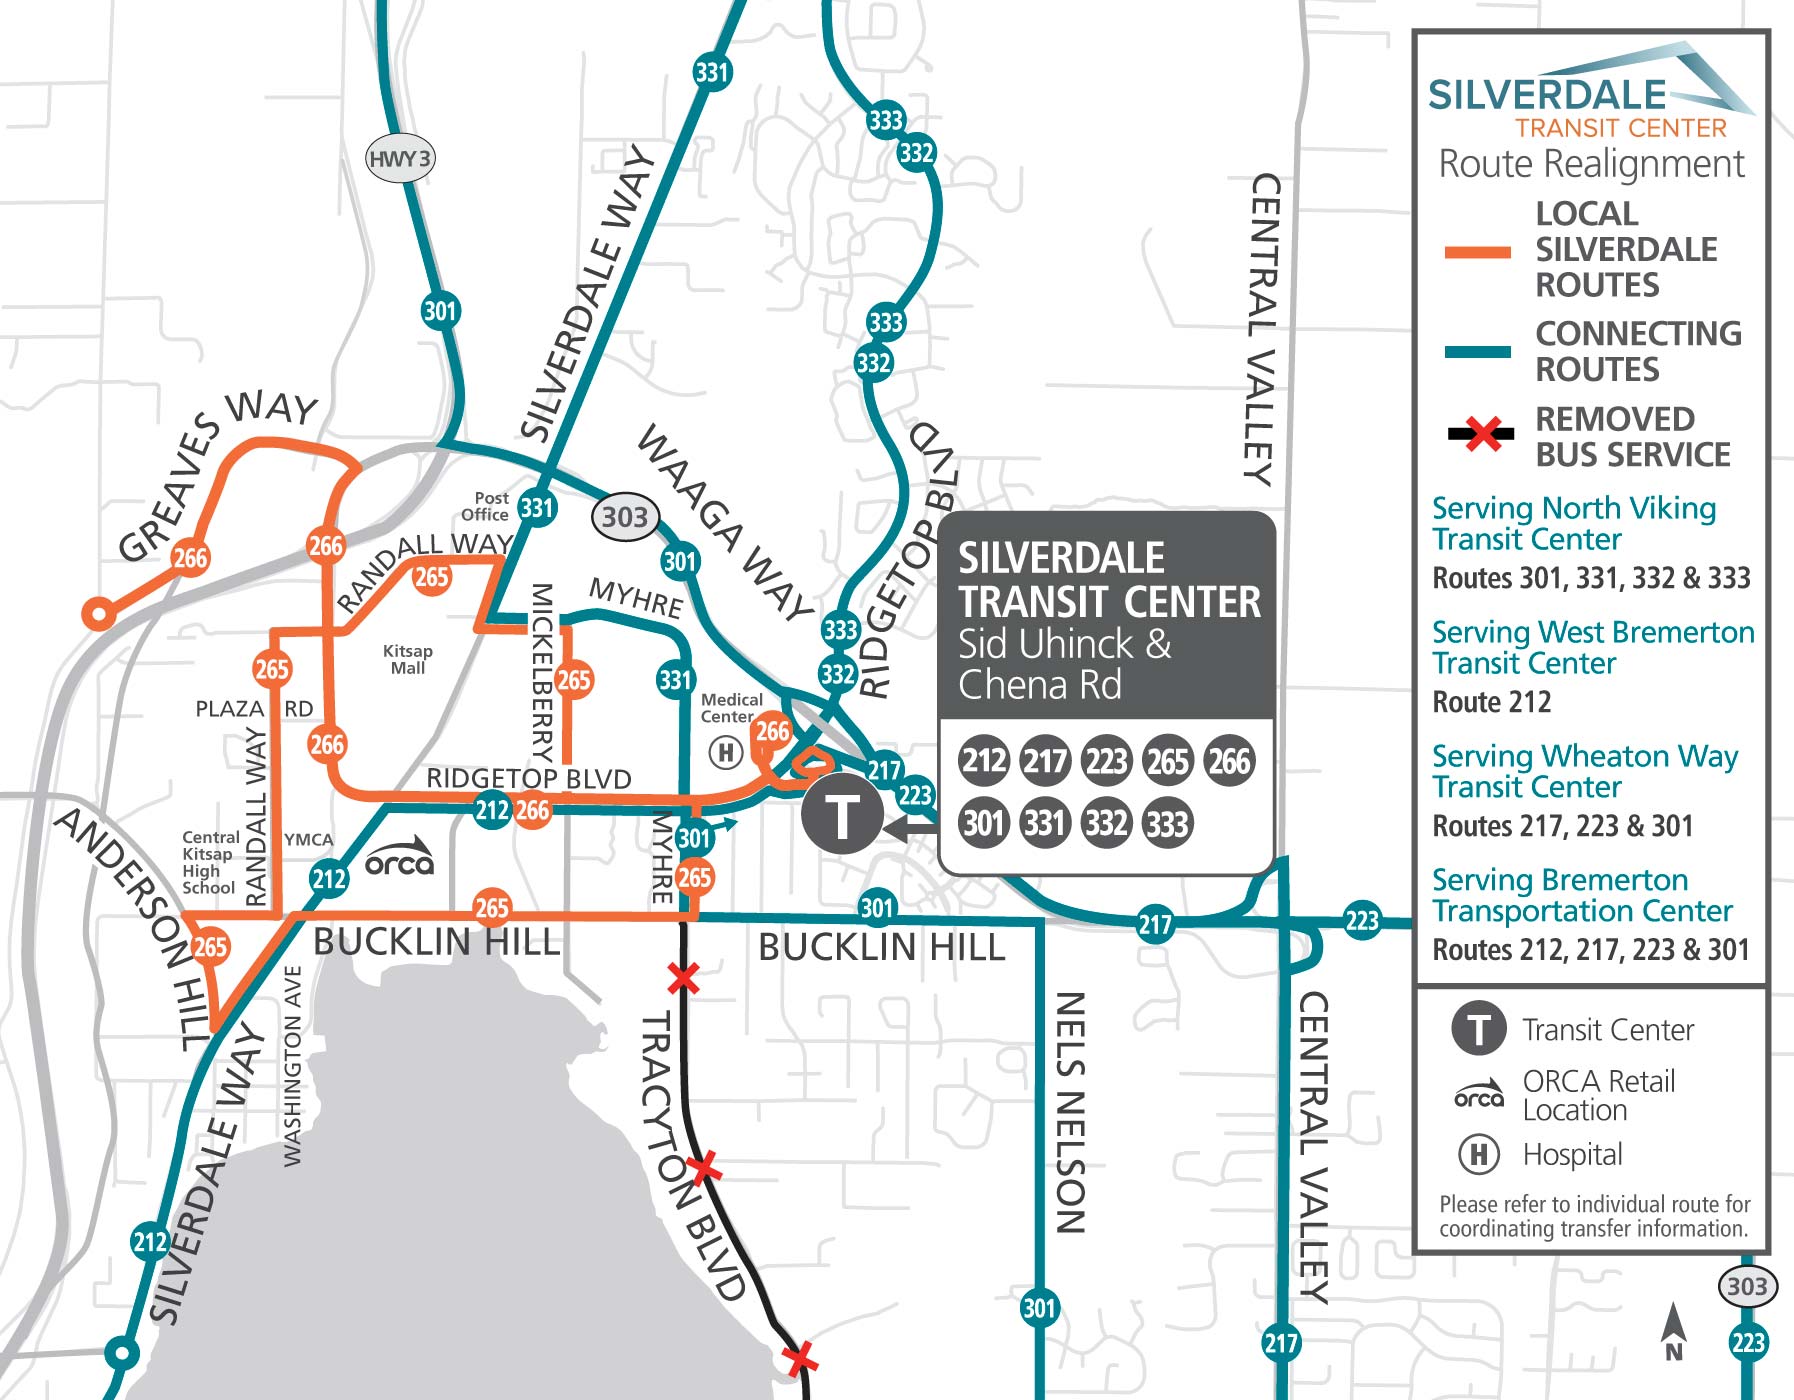 New Silverdale Transit Center route realignment 